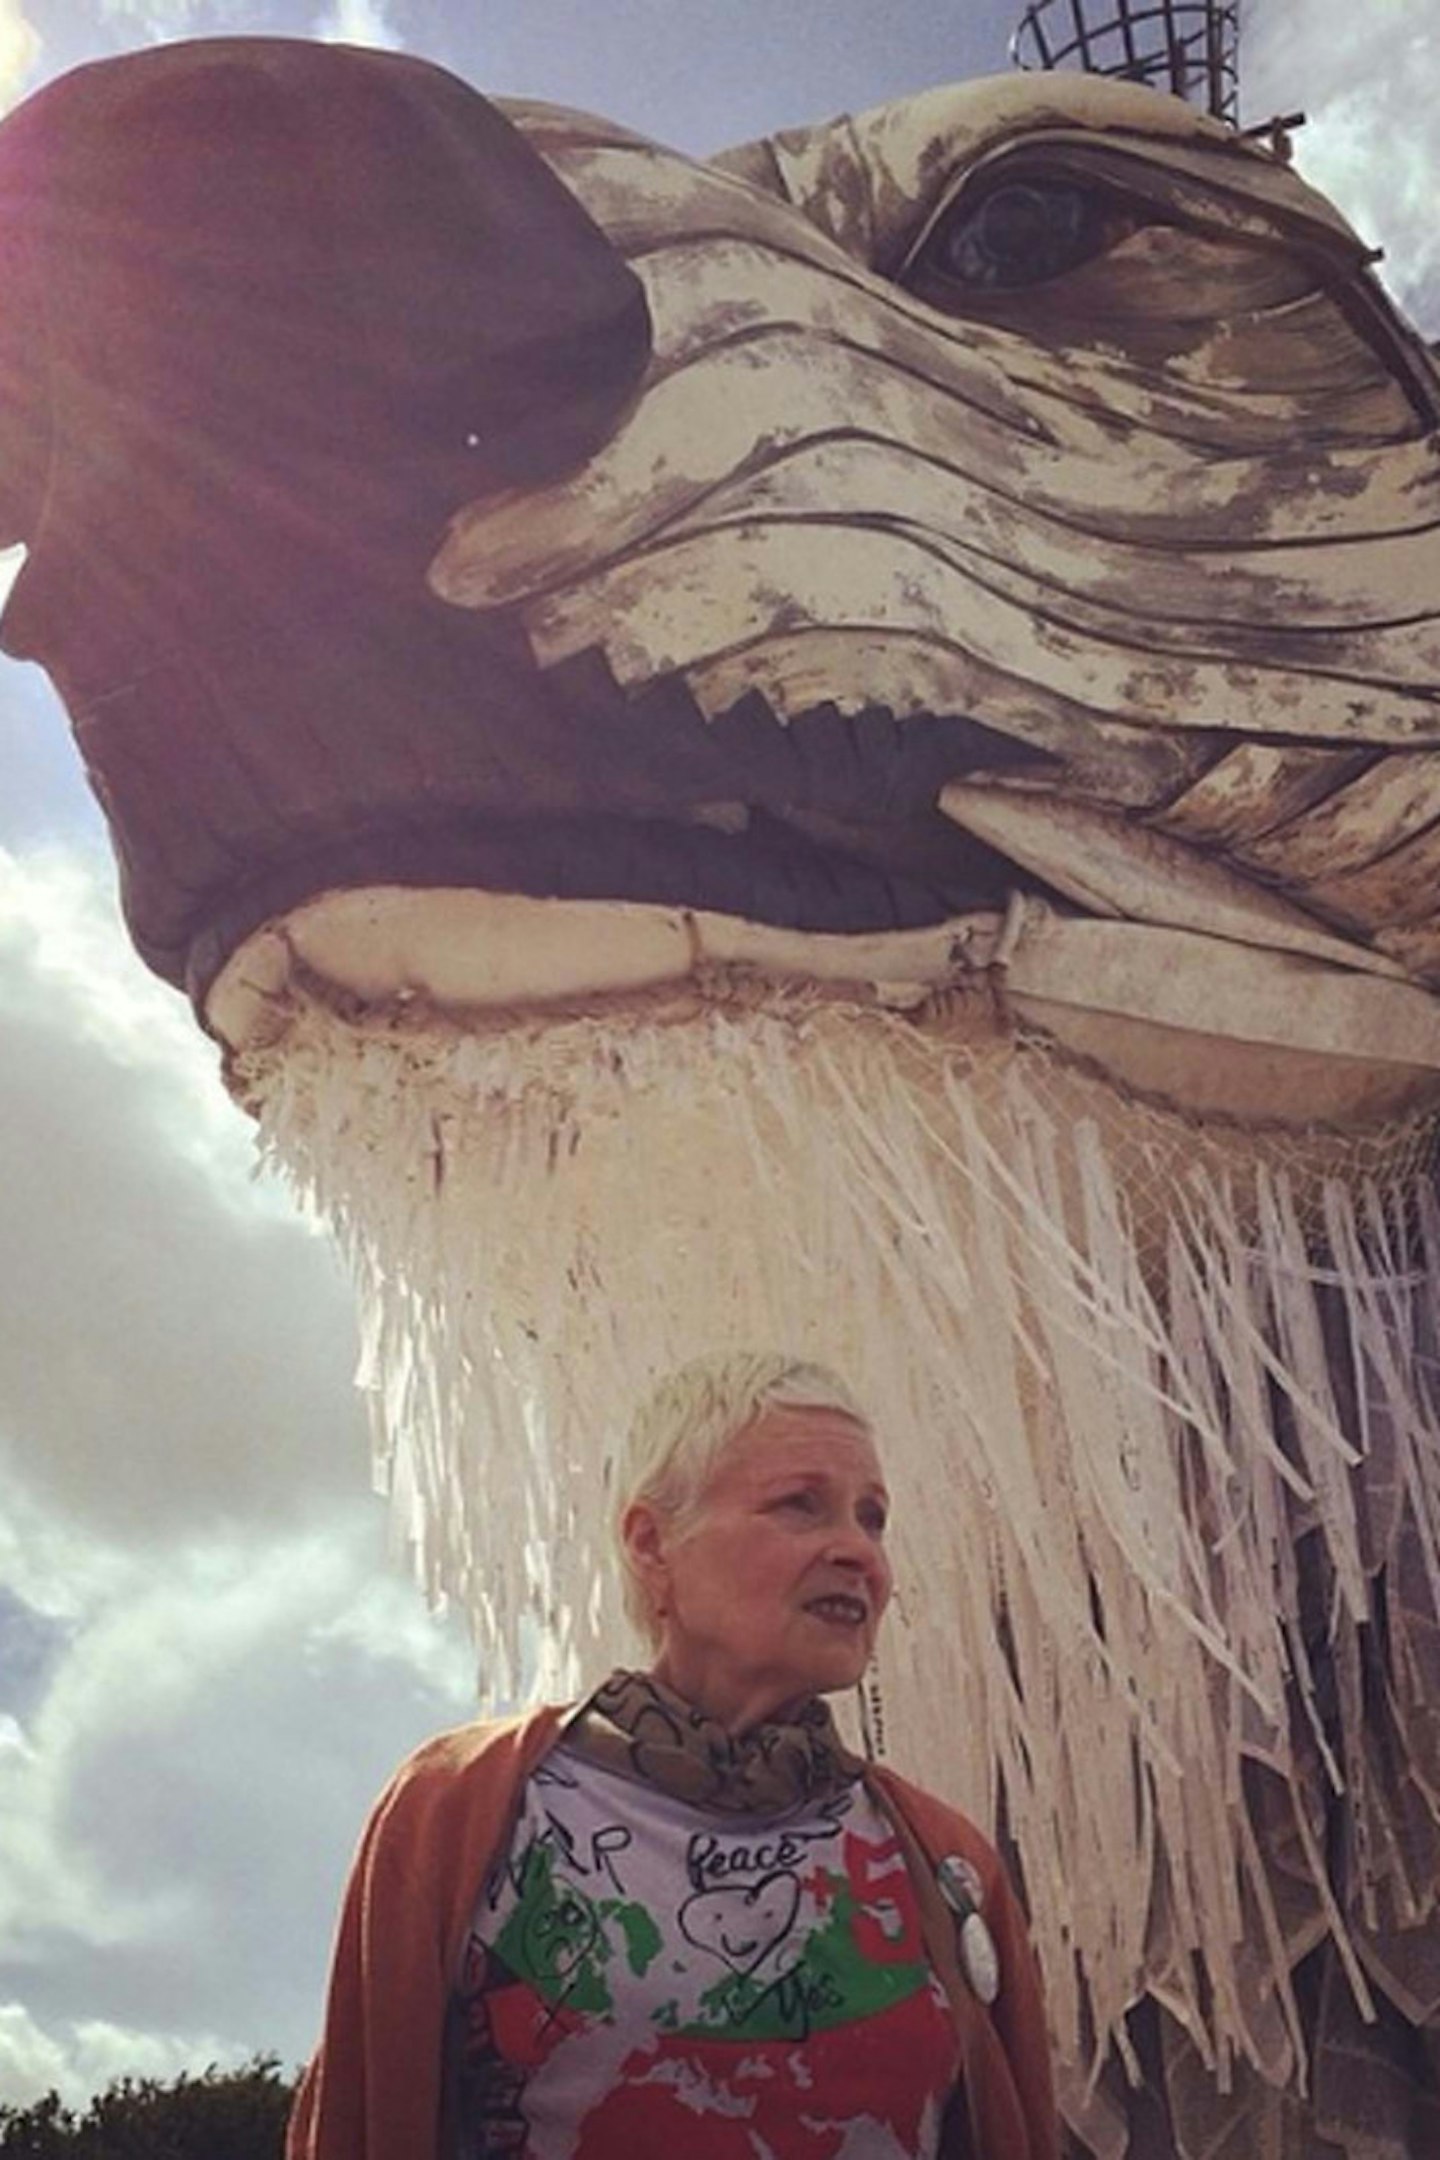 @viviennewestwoodofficial: Vivienne was at Glastonbury Festival today speaking about environmental issues. You'll find more pictures on our Facebook page.